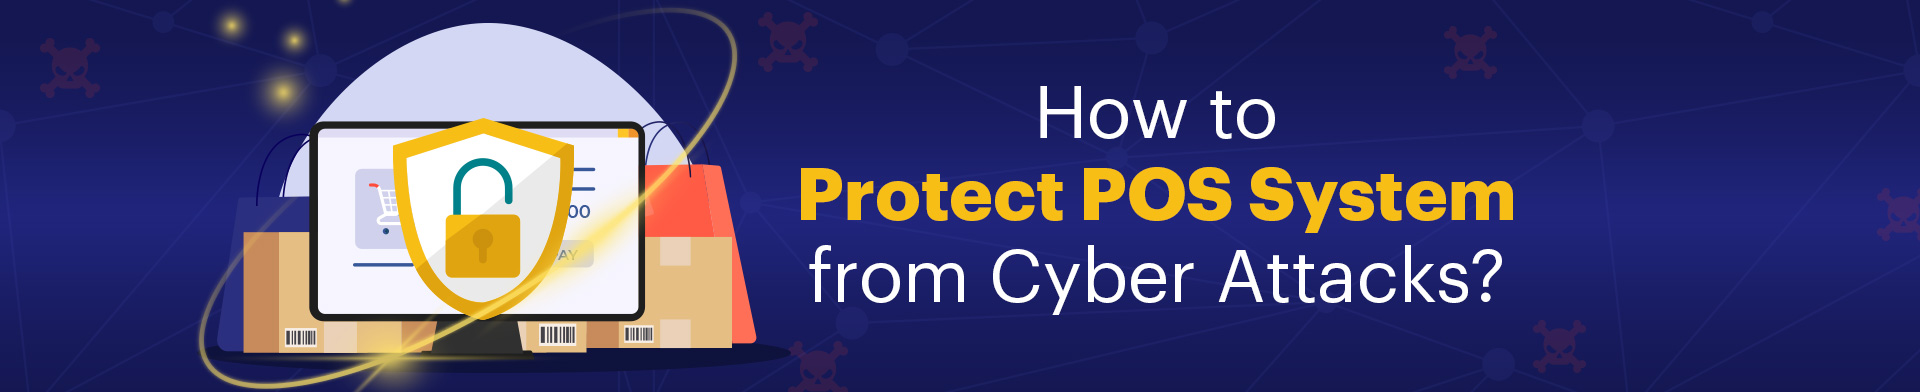 POS Security | How to Protect POS System from Cyber Attacks? 